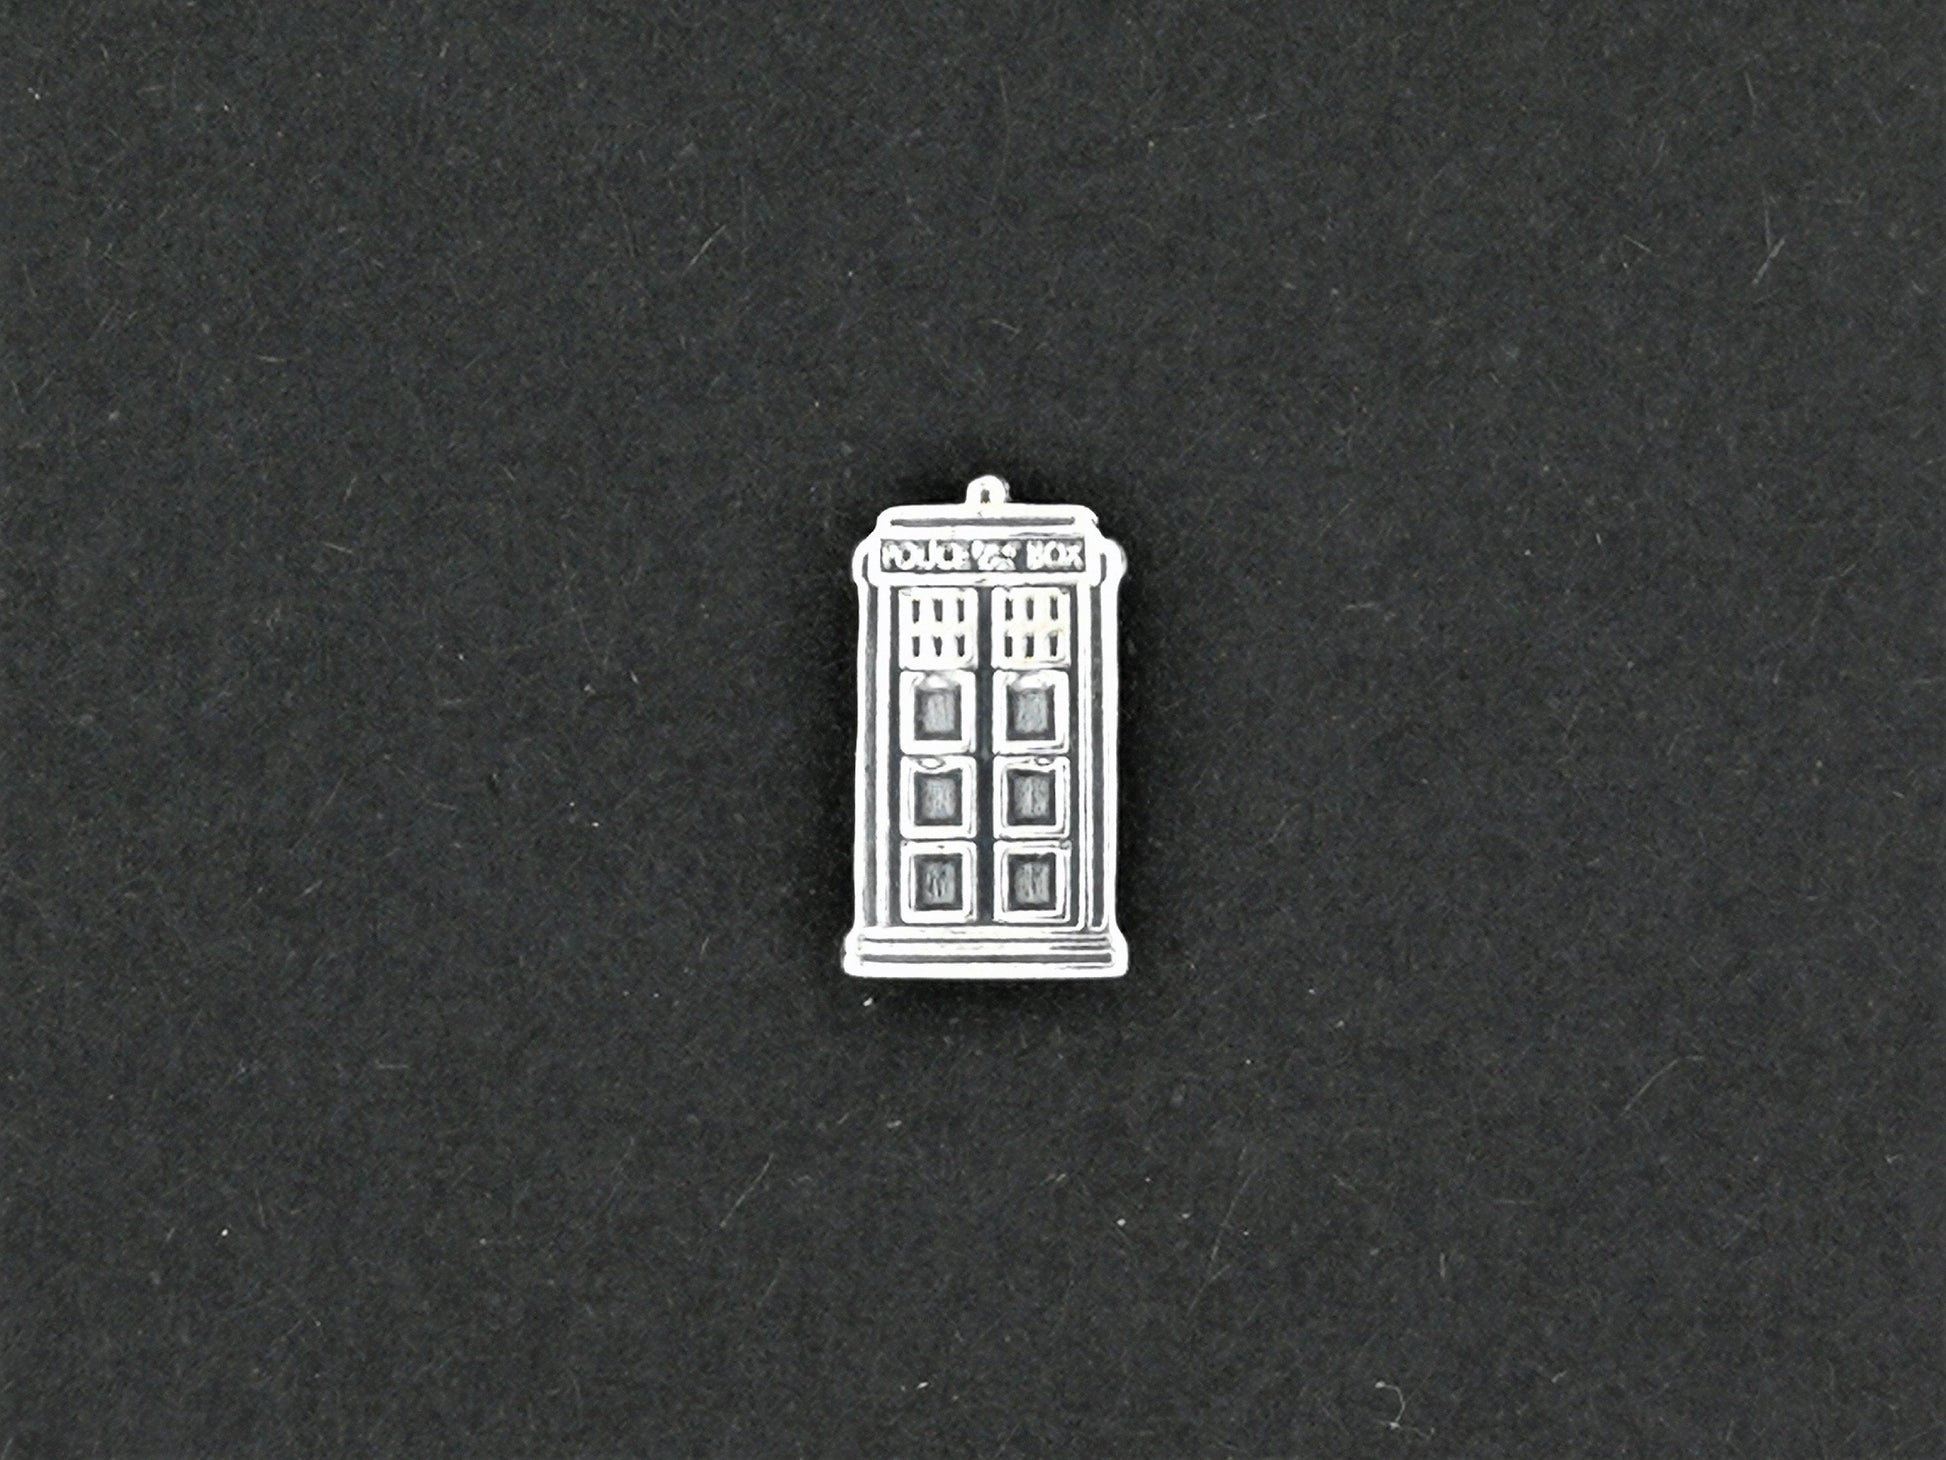 Gold Dr Who Tardis Single Stud Earring, Dr Who Earring, Phone Box Stud Earring, Dr Who Jewellery, Police Box Earring, Dr Who Jewelry, Phone Box Studs, Dr Who Phone Box, Gold Phone Box Stud, Gold Tardis Earrings, Sci-Fi Jewelry, Gold Stud Earrings